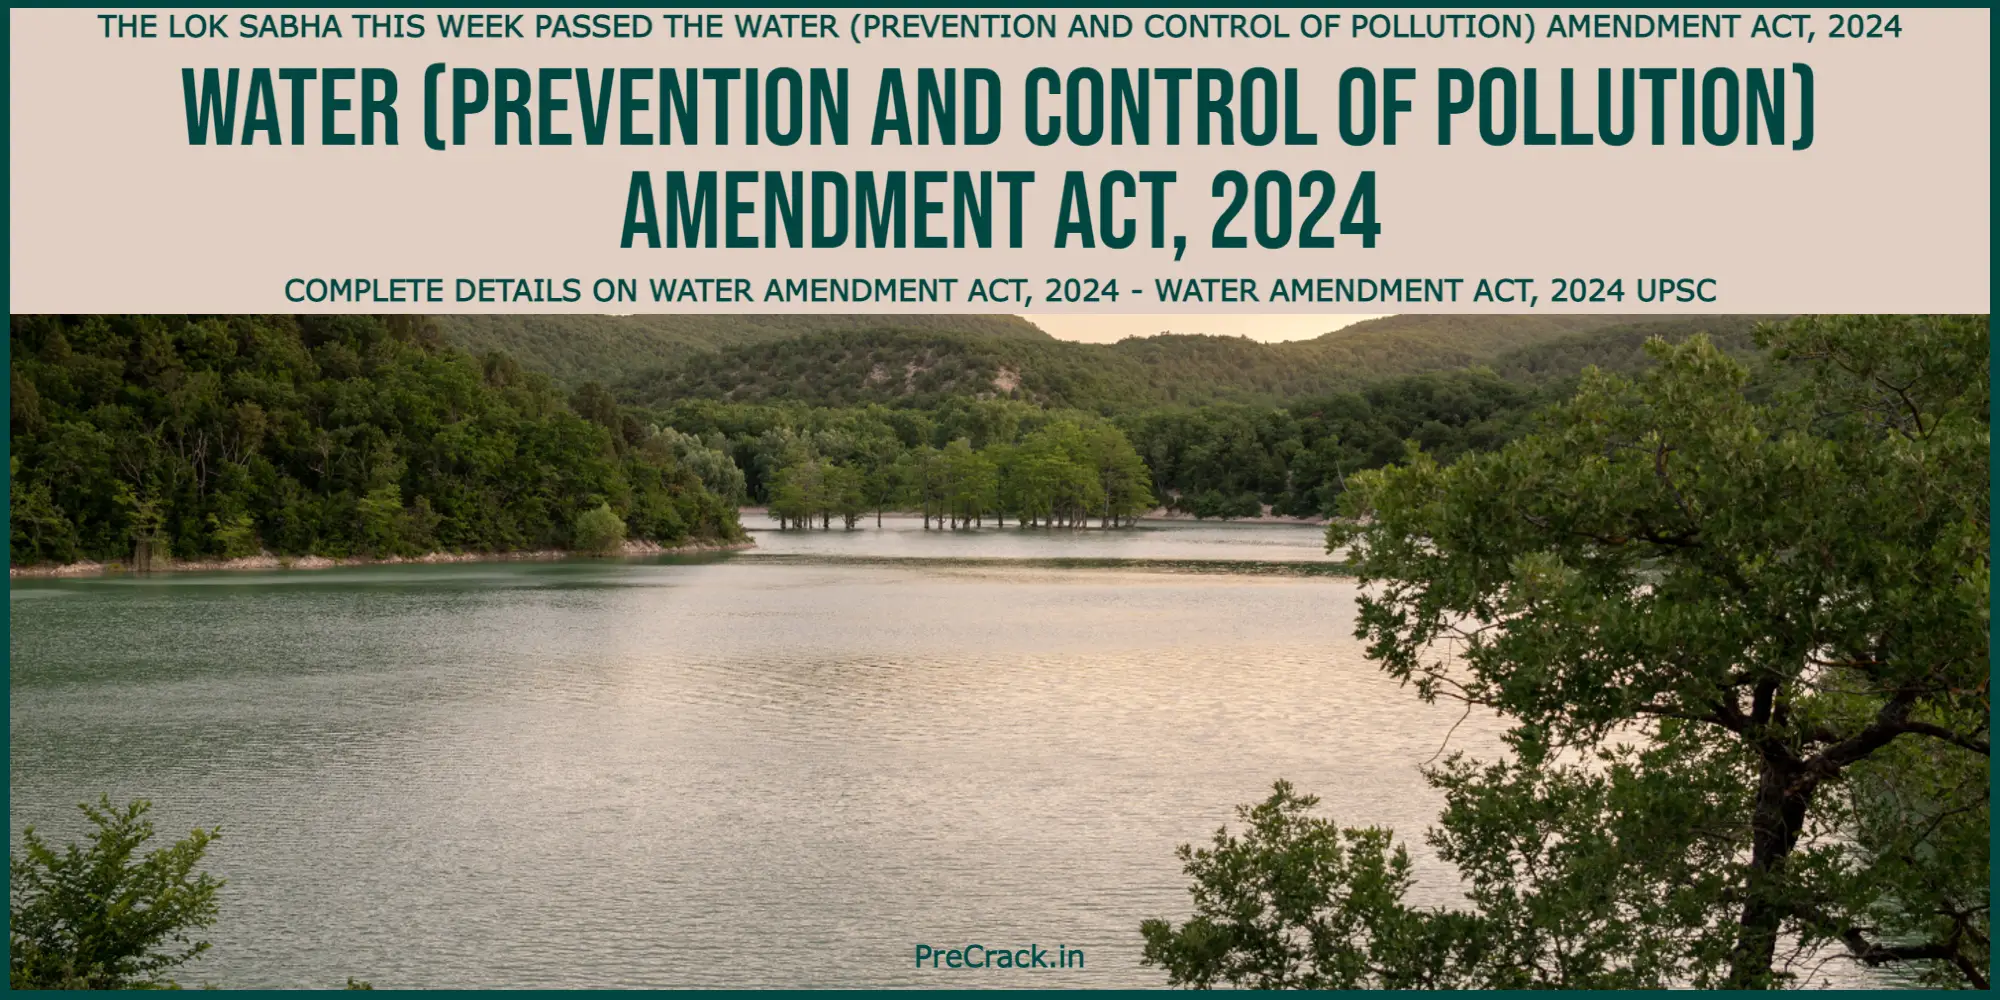 What’s new in Water (Prevention and Control of Pollution) Amendment Act